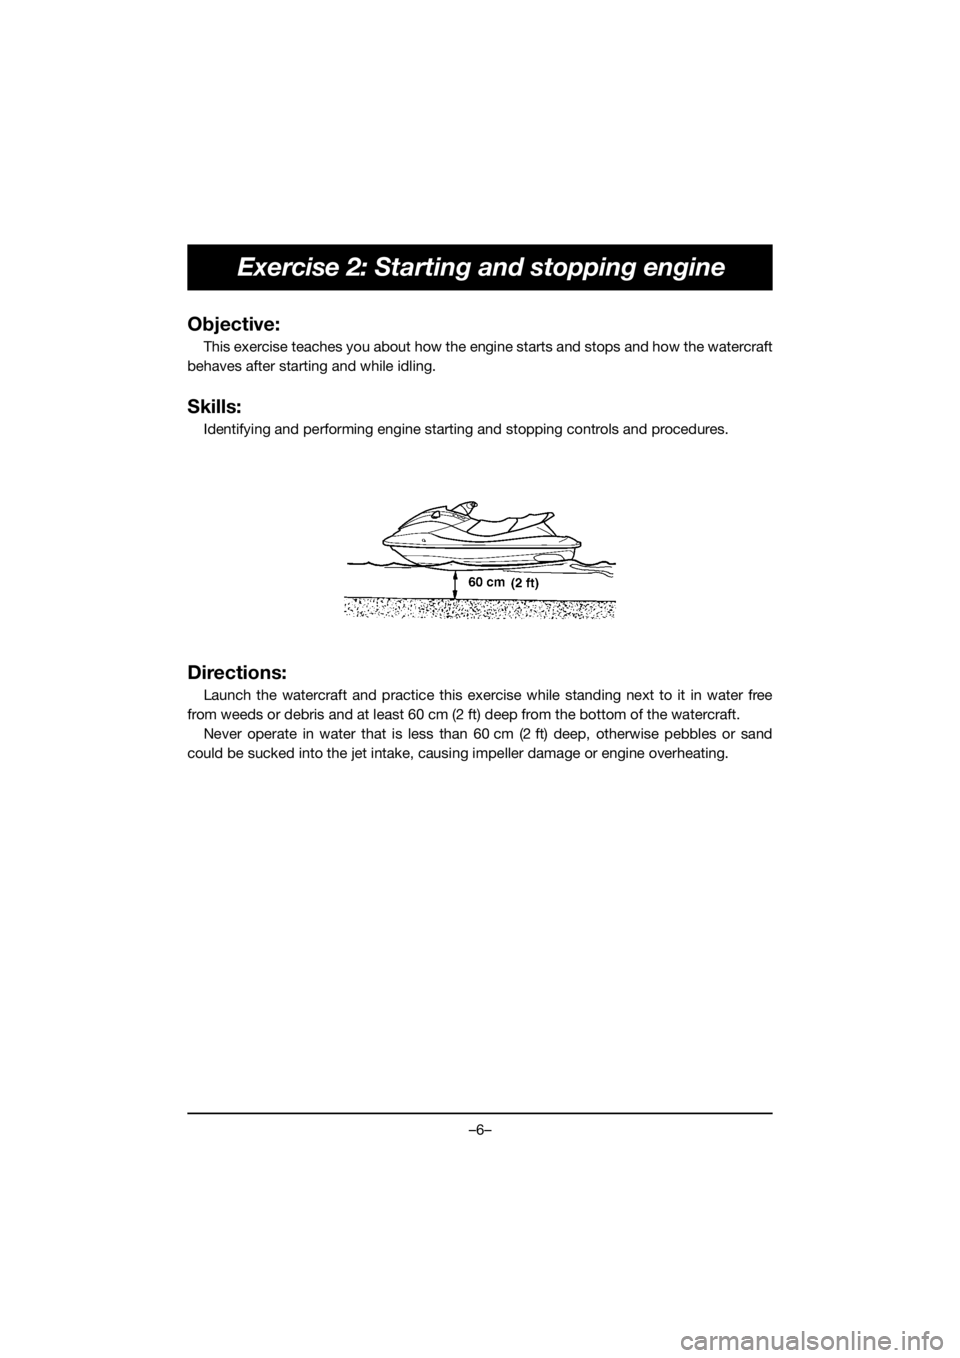 YAMAHA FX HO 2019  Bruksanvisningar (in Swedish) –6–
Exercise 2: Starting and stopping engine
Objective:
This exercise teaches you about how the engine starts and stops and how the watercraft
behaves after starting and while idling.
Skills:
Iden